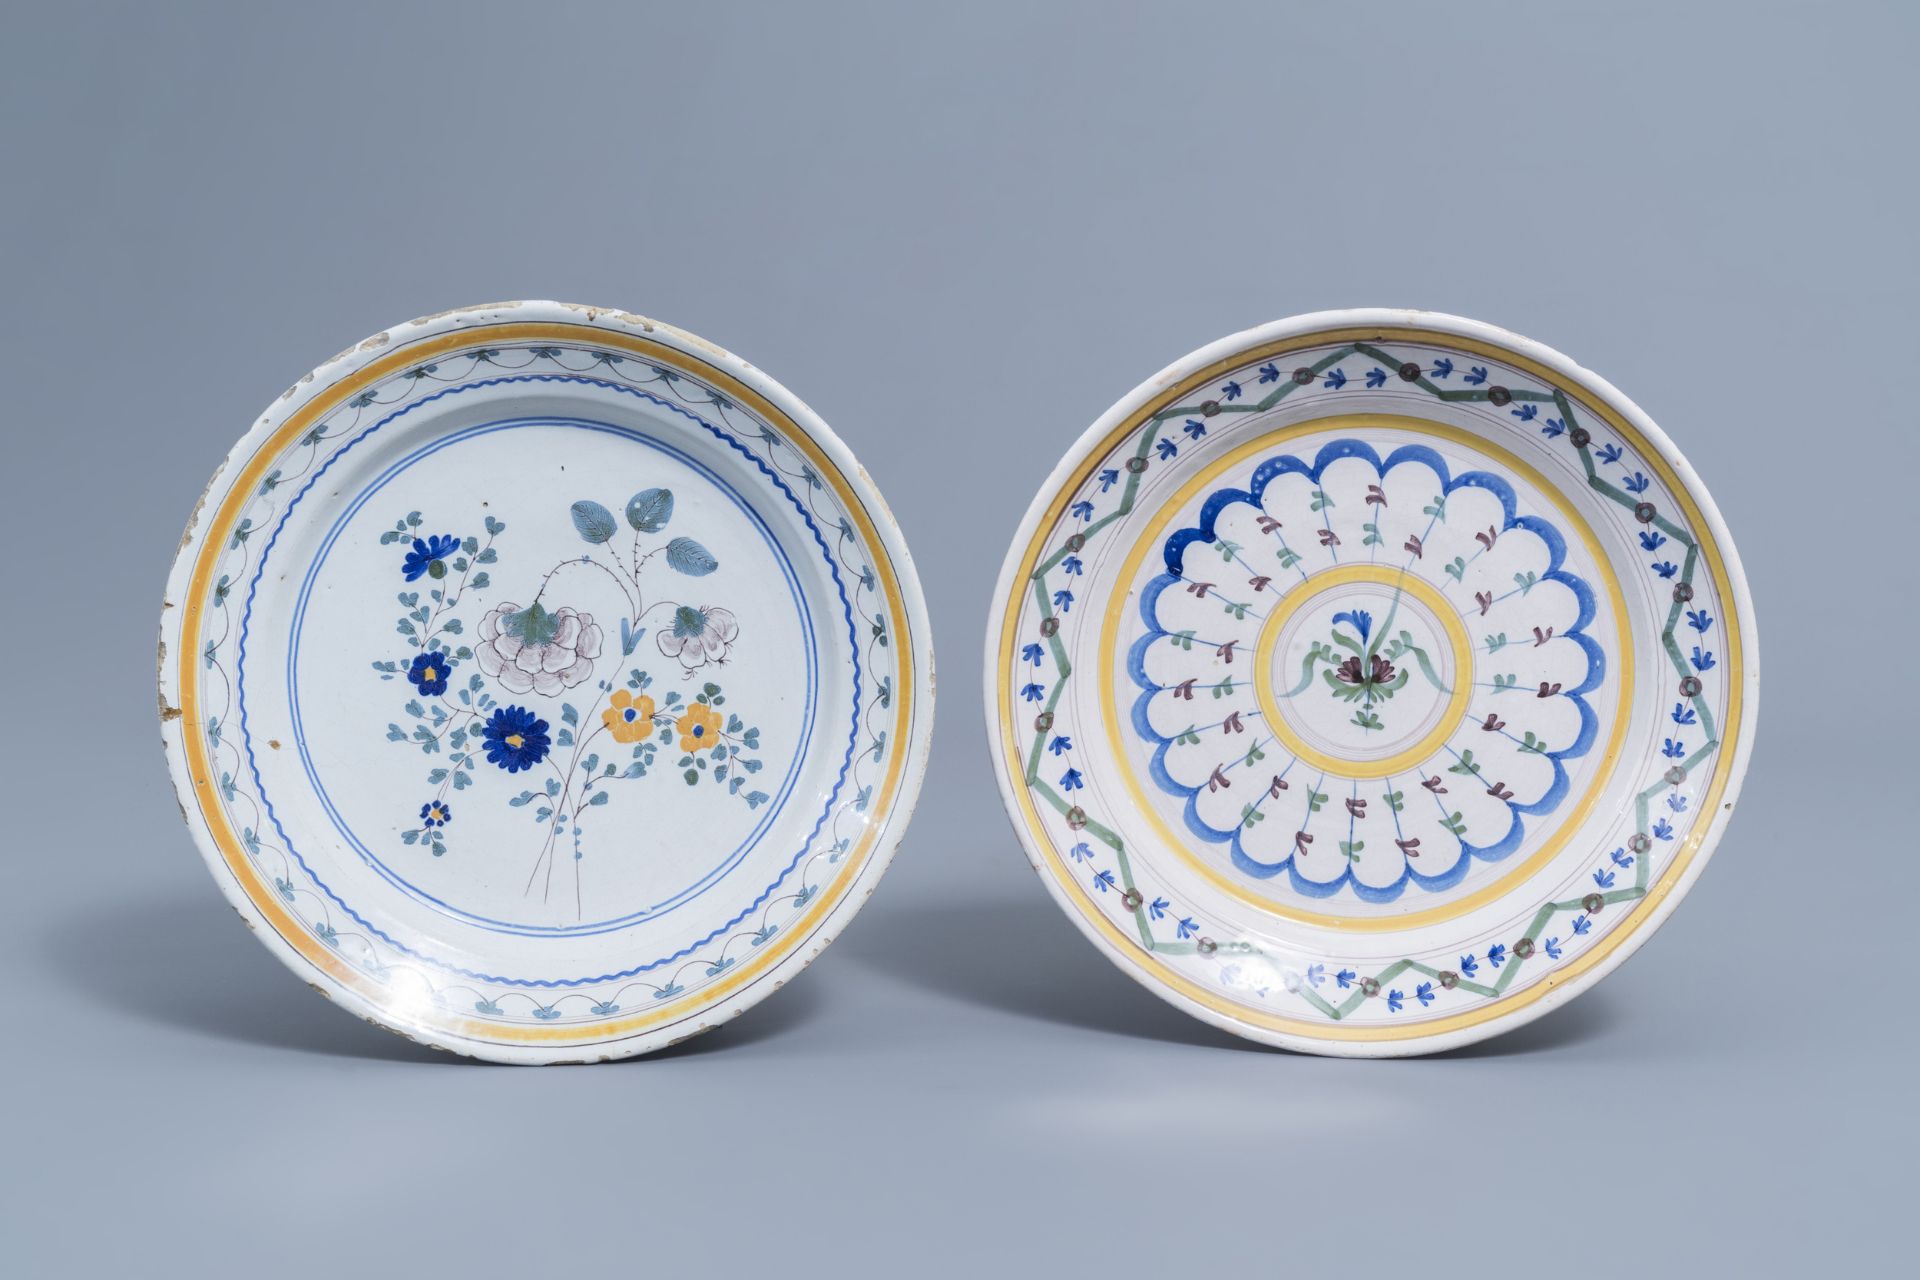 Five polychrome Brussels faience plates with floral design, 18th/19th C. - Image 7 of 12